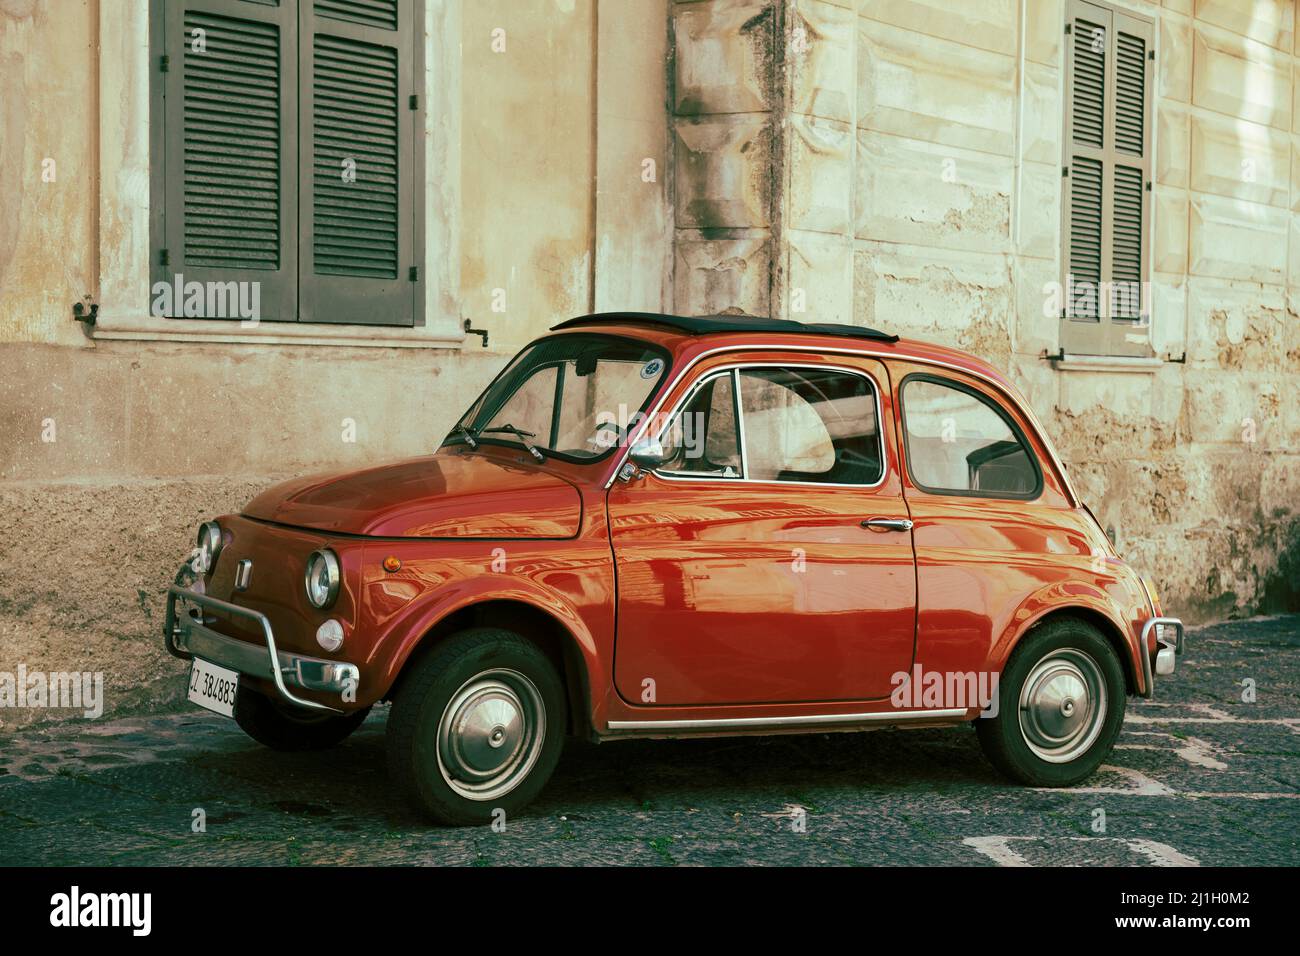 Red vintage antique car Fiat Cinquecento (500) parked in Italian town Stock Photo